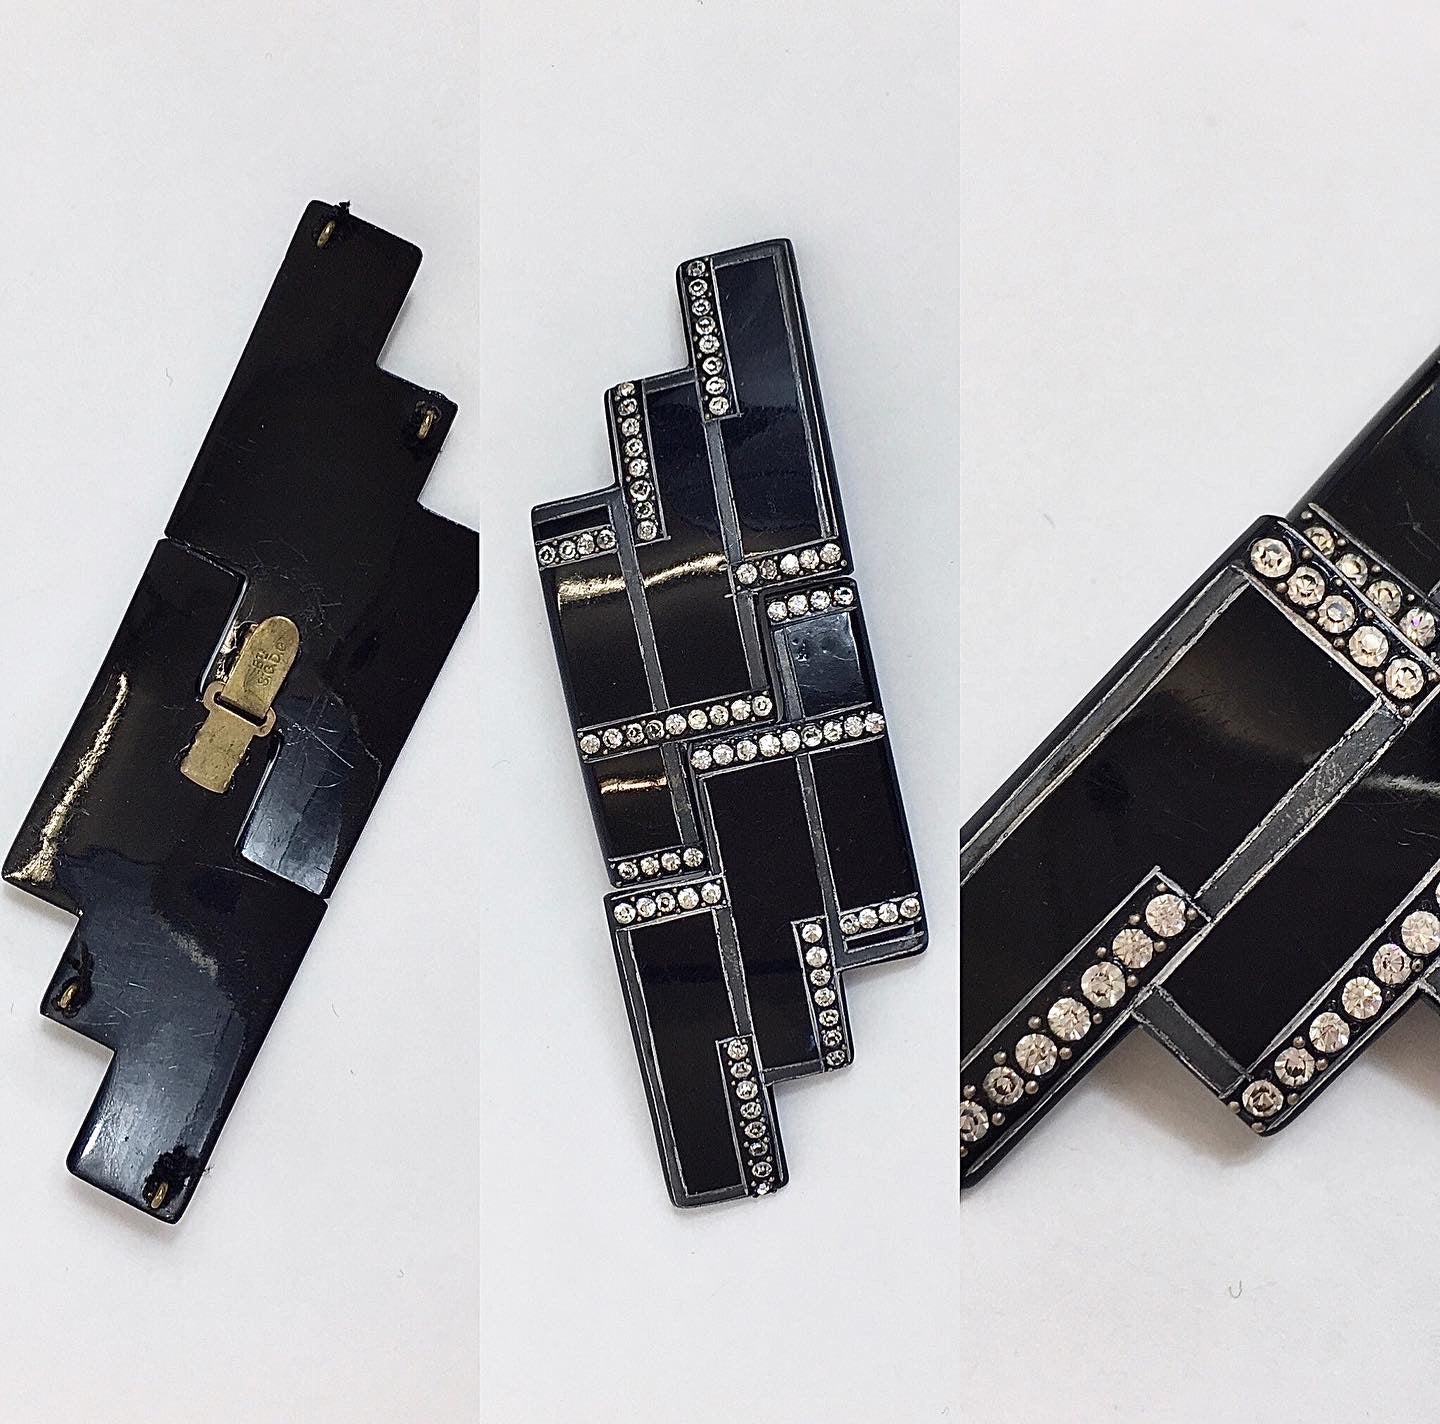 Original 1920's / 1930's Large Art Deco Buckle - With Stunning Deco Lines and Paste Details